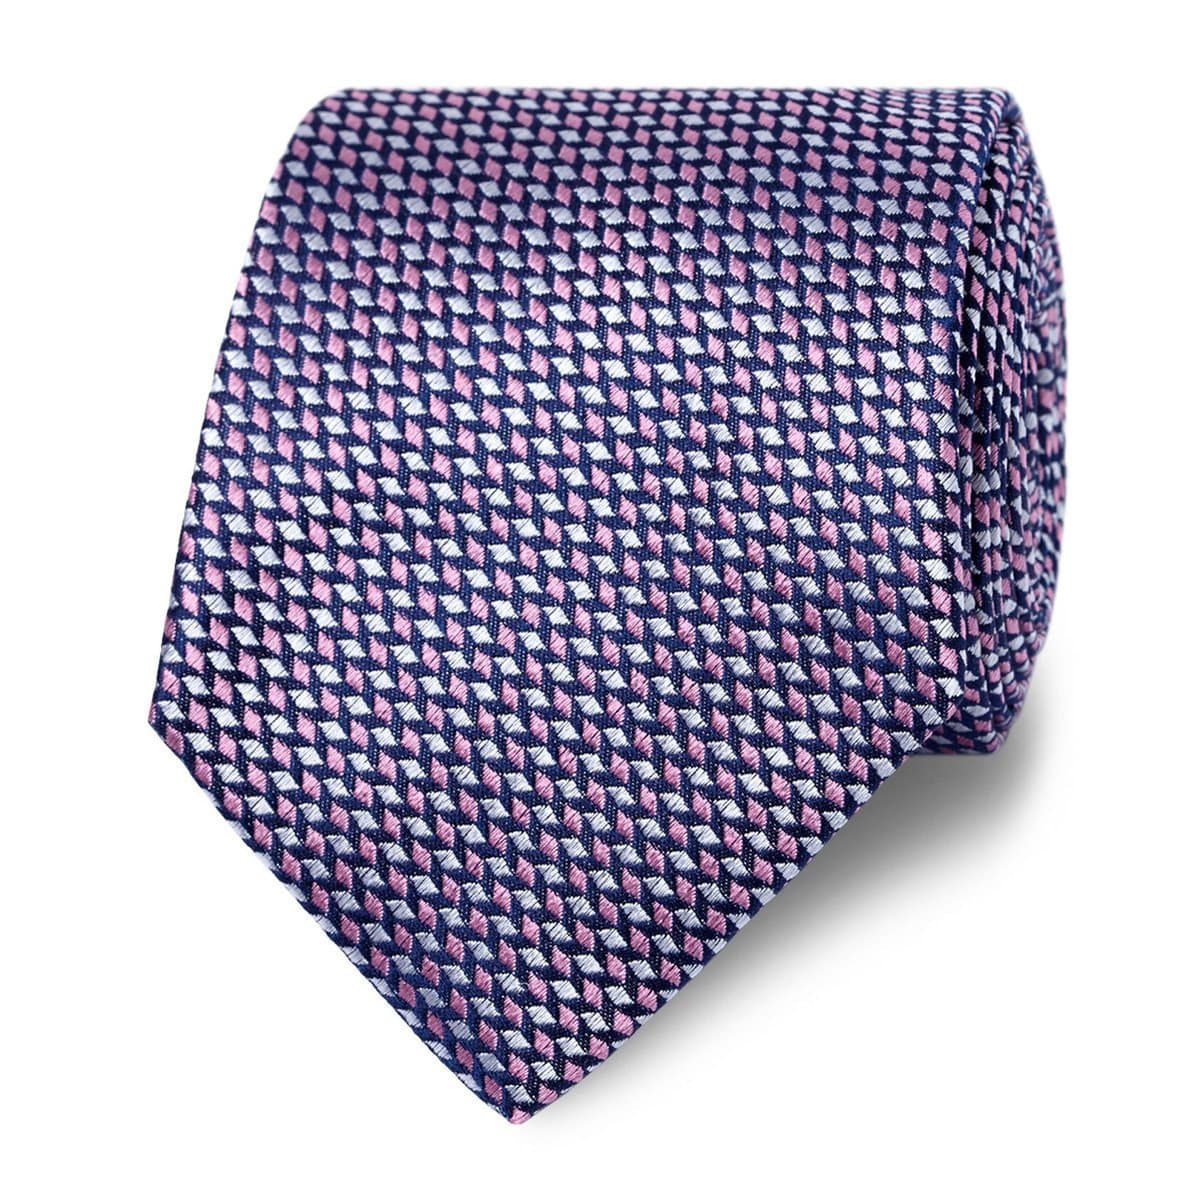 T.M.Lewin-Mini-Dash-Tie-Navy-and-Pink-69726-003